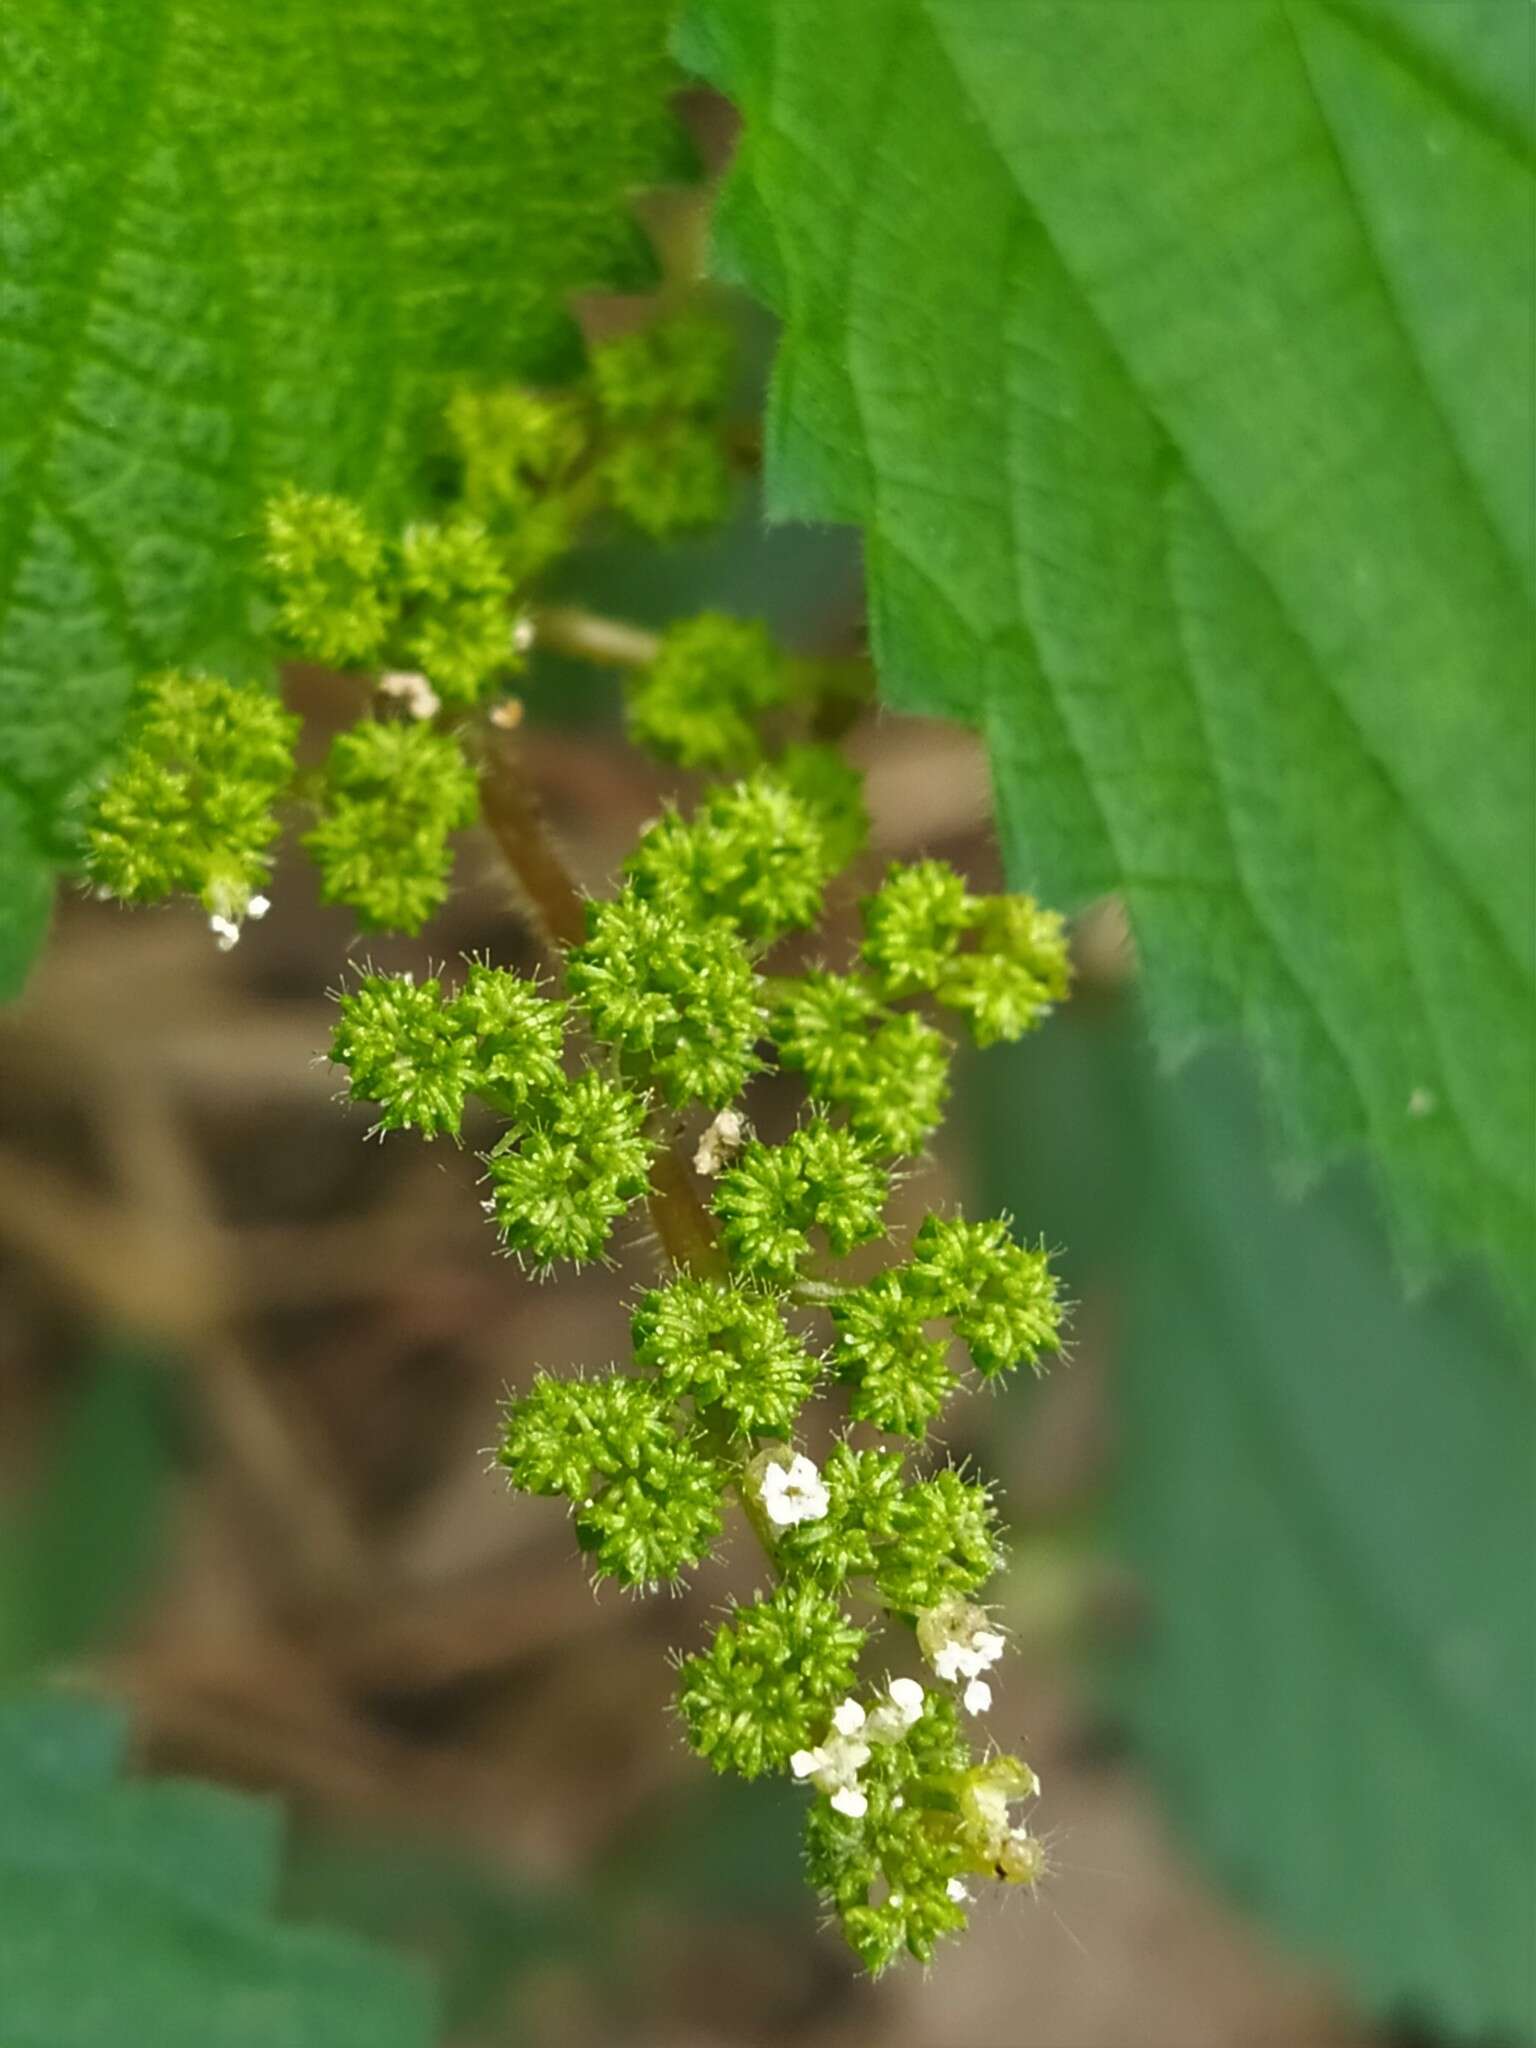 Image of West Indian woodnettle